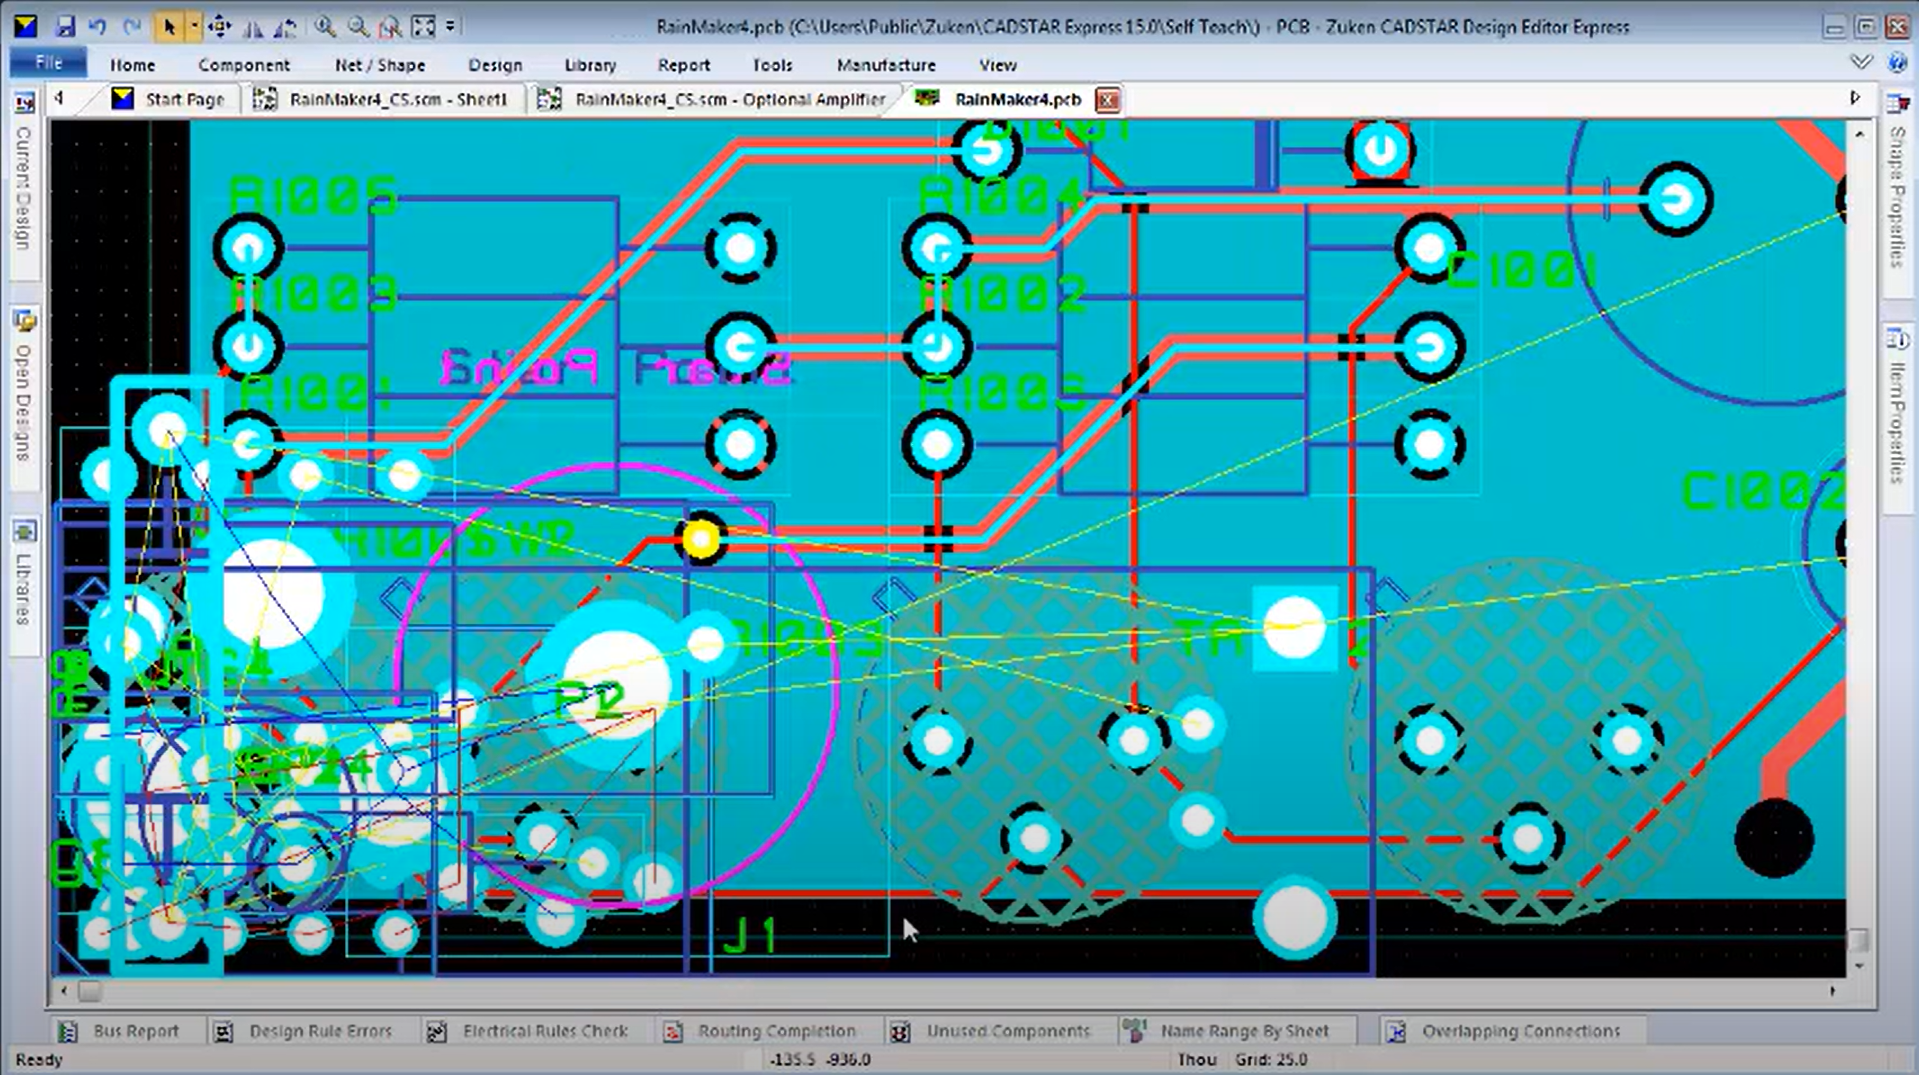 CADSTAR Express PCB manufacturing software that is one of the best free PCB design software on the market. in this case you are seeing the PCB view